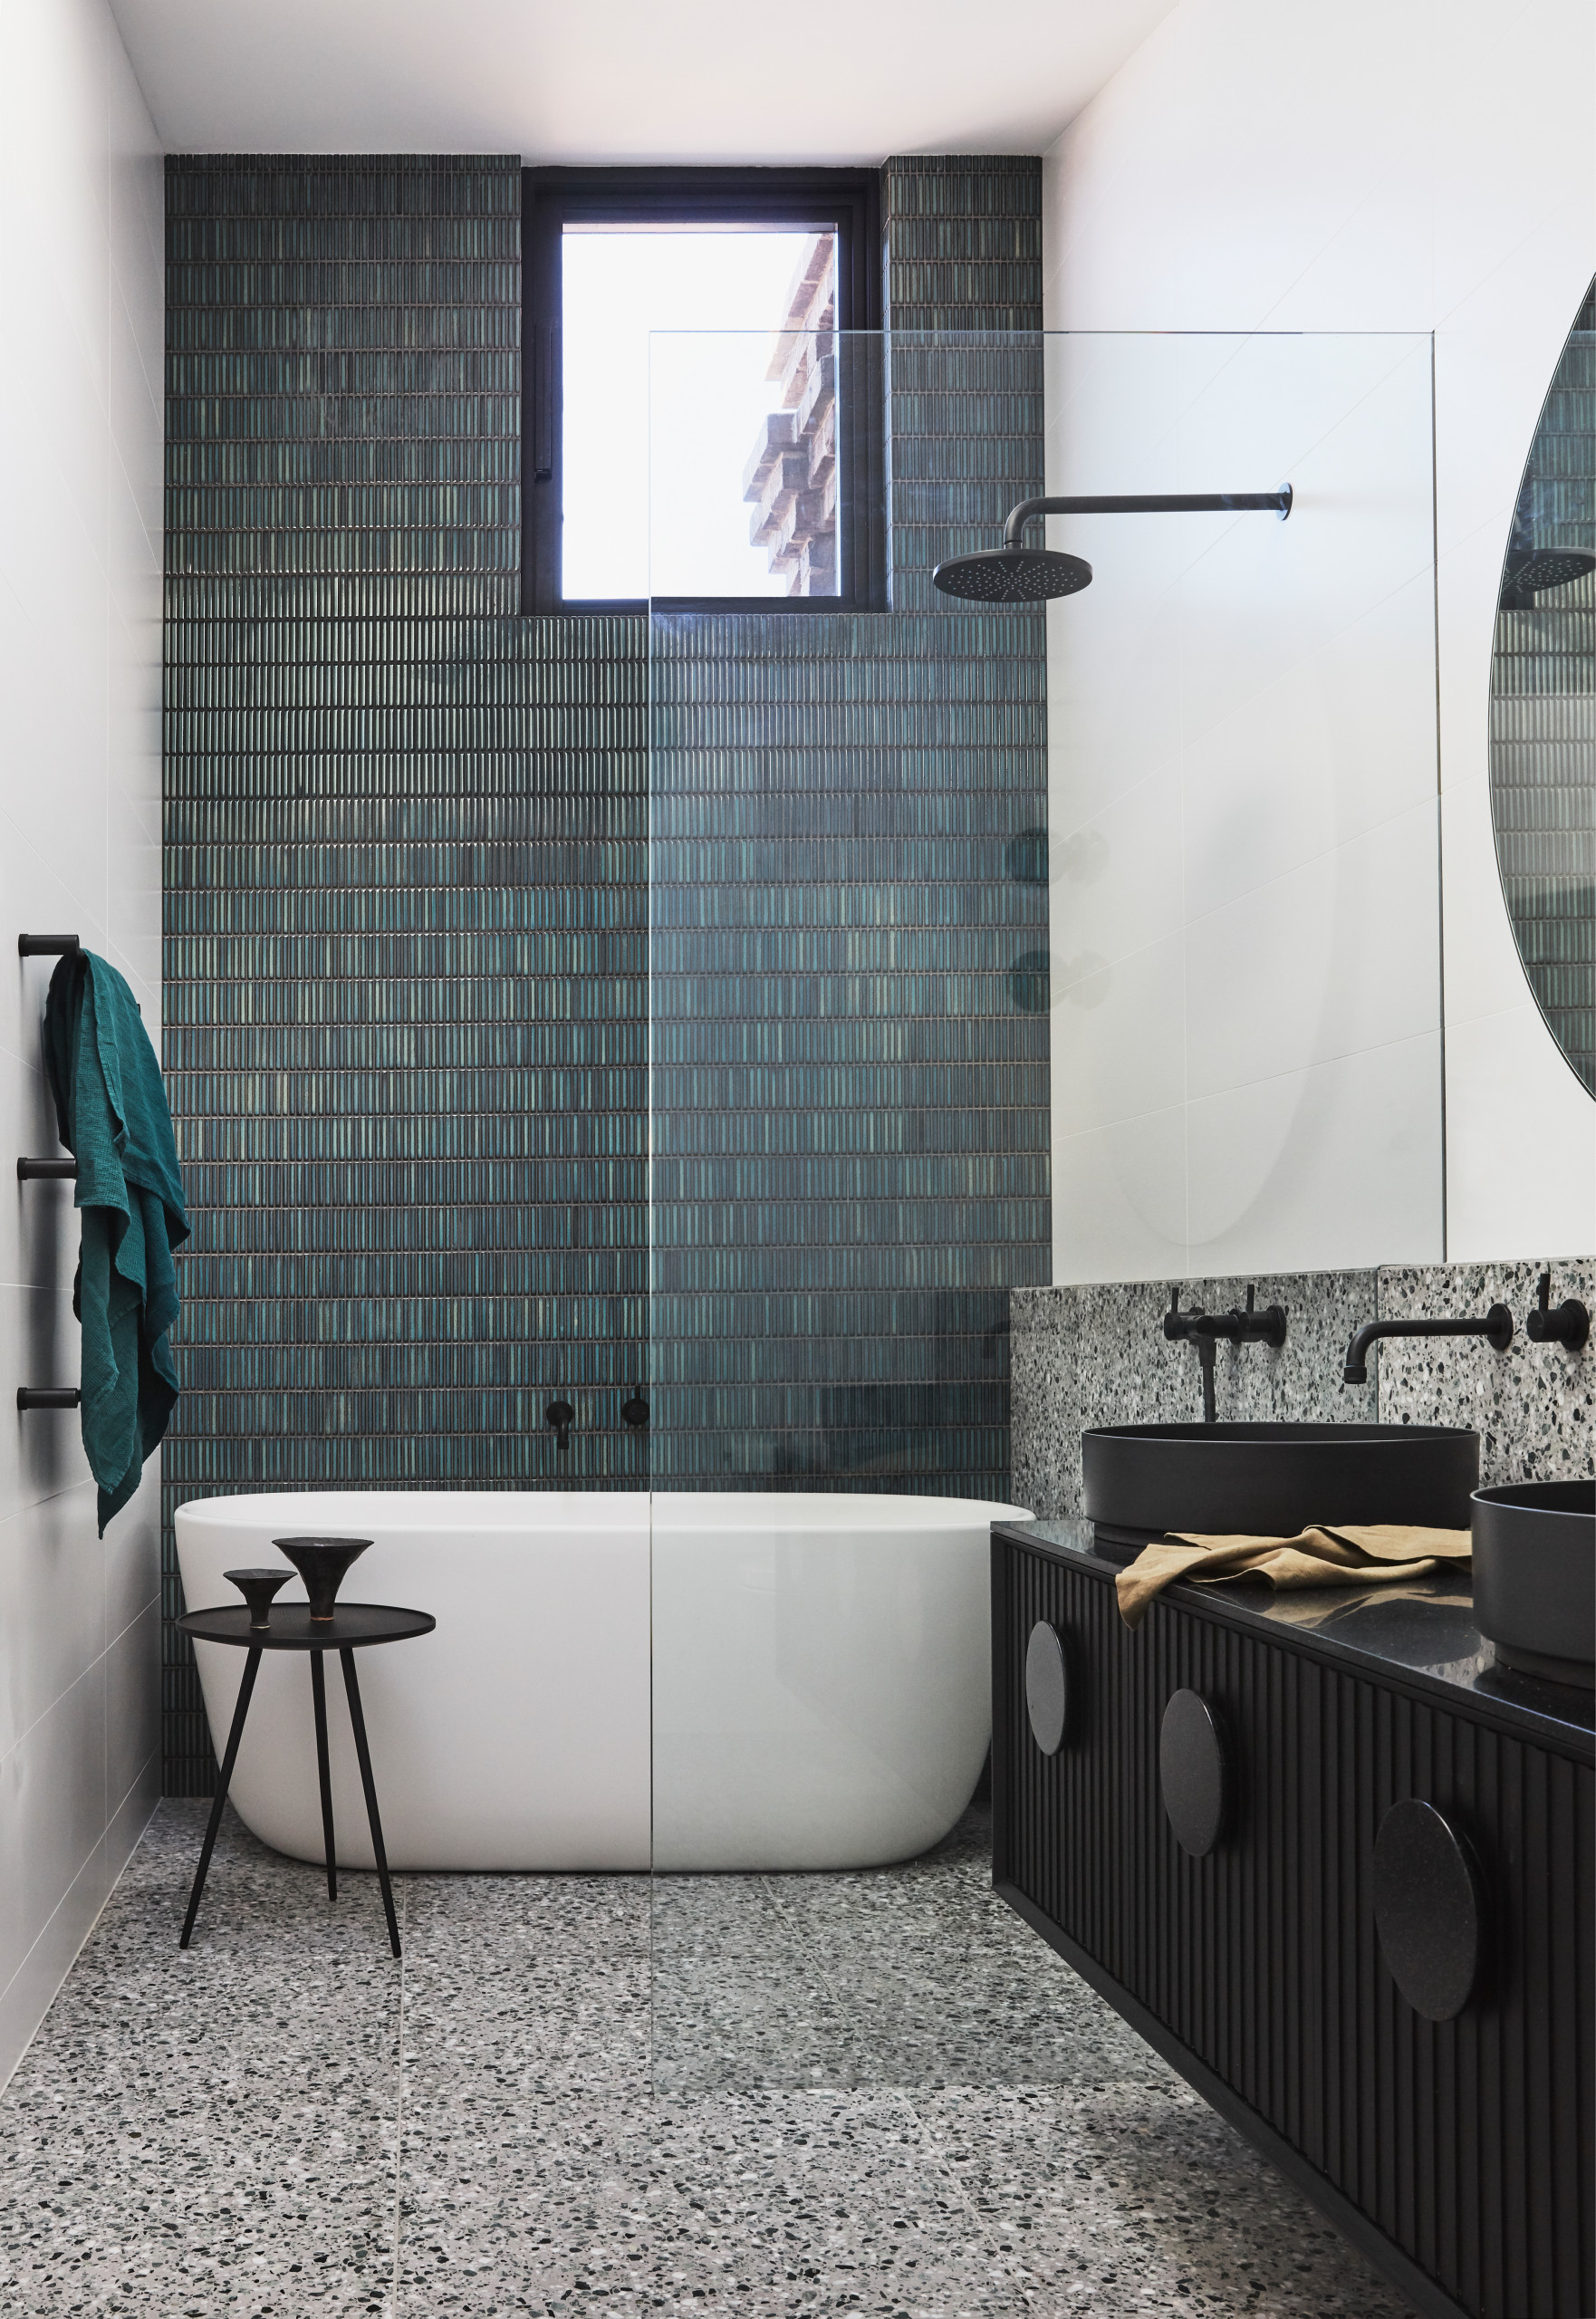 32+ of The Most Popular Bathroom Color Ideas in 2023